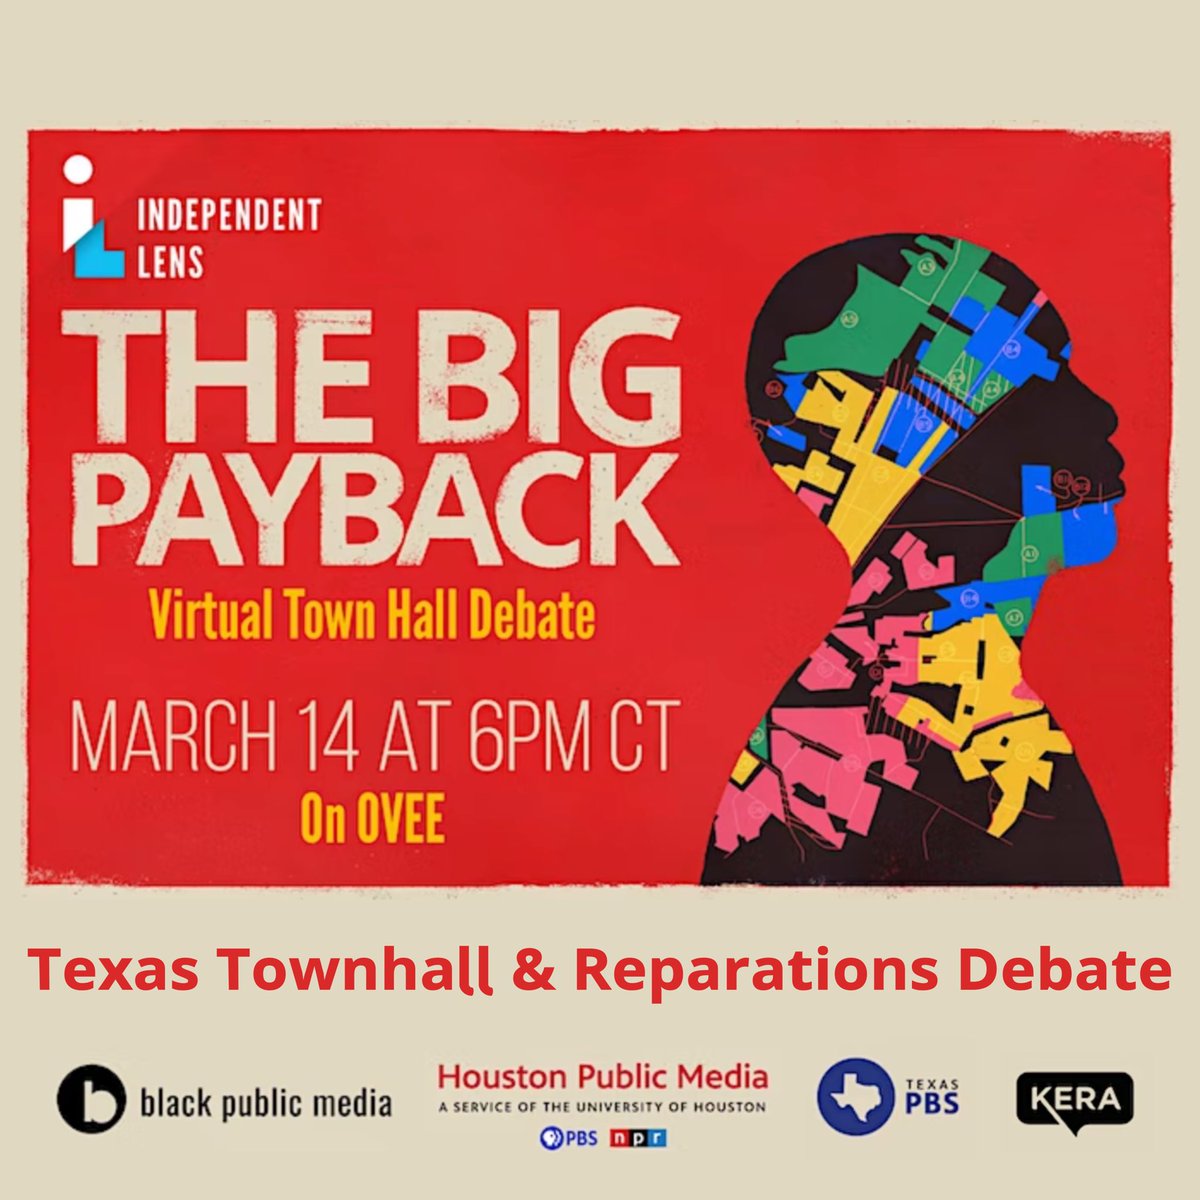 Texas Townhall & Reparations Debate! Join me TOMORROW for a virtual town hall debate on the future of #reparations in America! Register here eventbrite.com/e/the-big-payb… @whitneybdow @RobinSimmons888 @TheConsciousLee @JerryLEADS + @EddieRobinsonJR